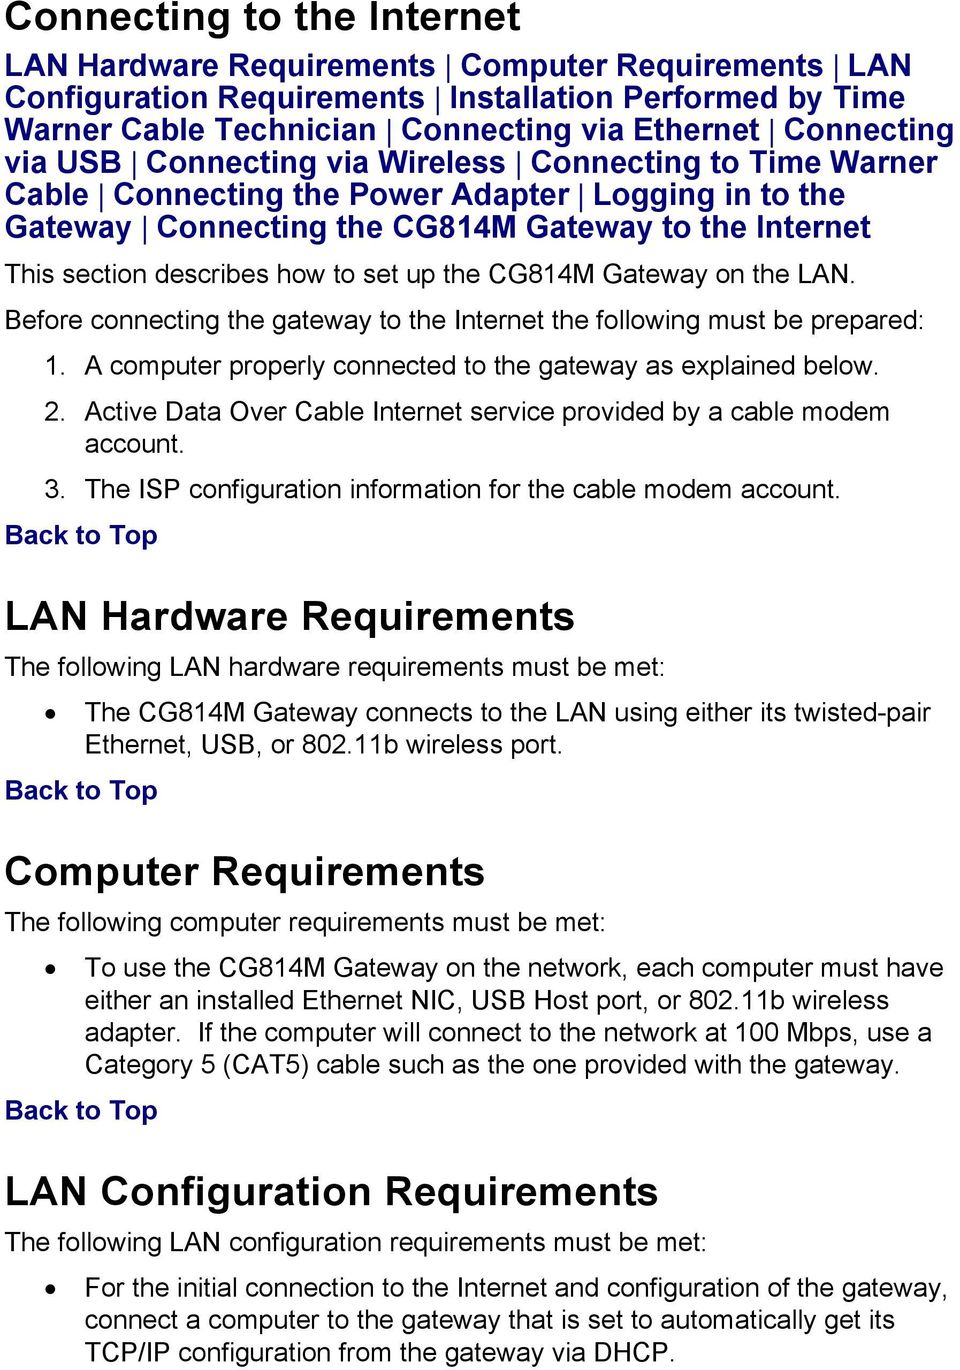 the CG814M Gateway on the LAN. Before connecting the gateway to the Internet the following must be prepared: 1. A computer properly connected to the gateway as explained below. 2.